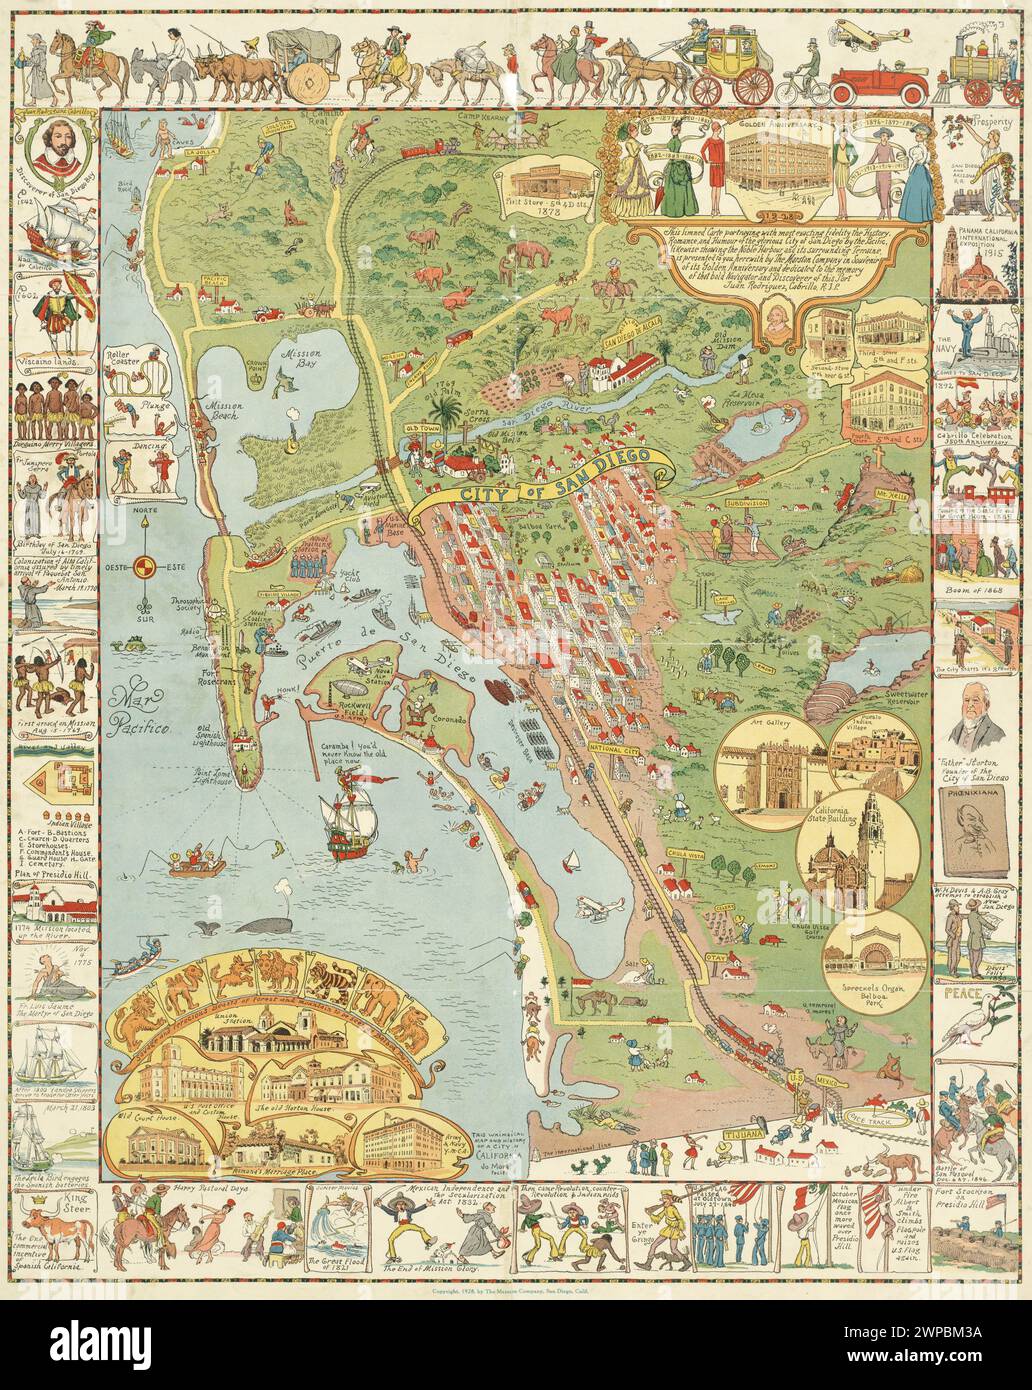 Vintage Pictorial Map of San Diego : 'A Whimsical map and History of a City in California' by J Mora.  1928 Stock Photo